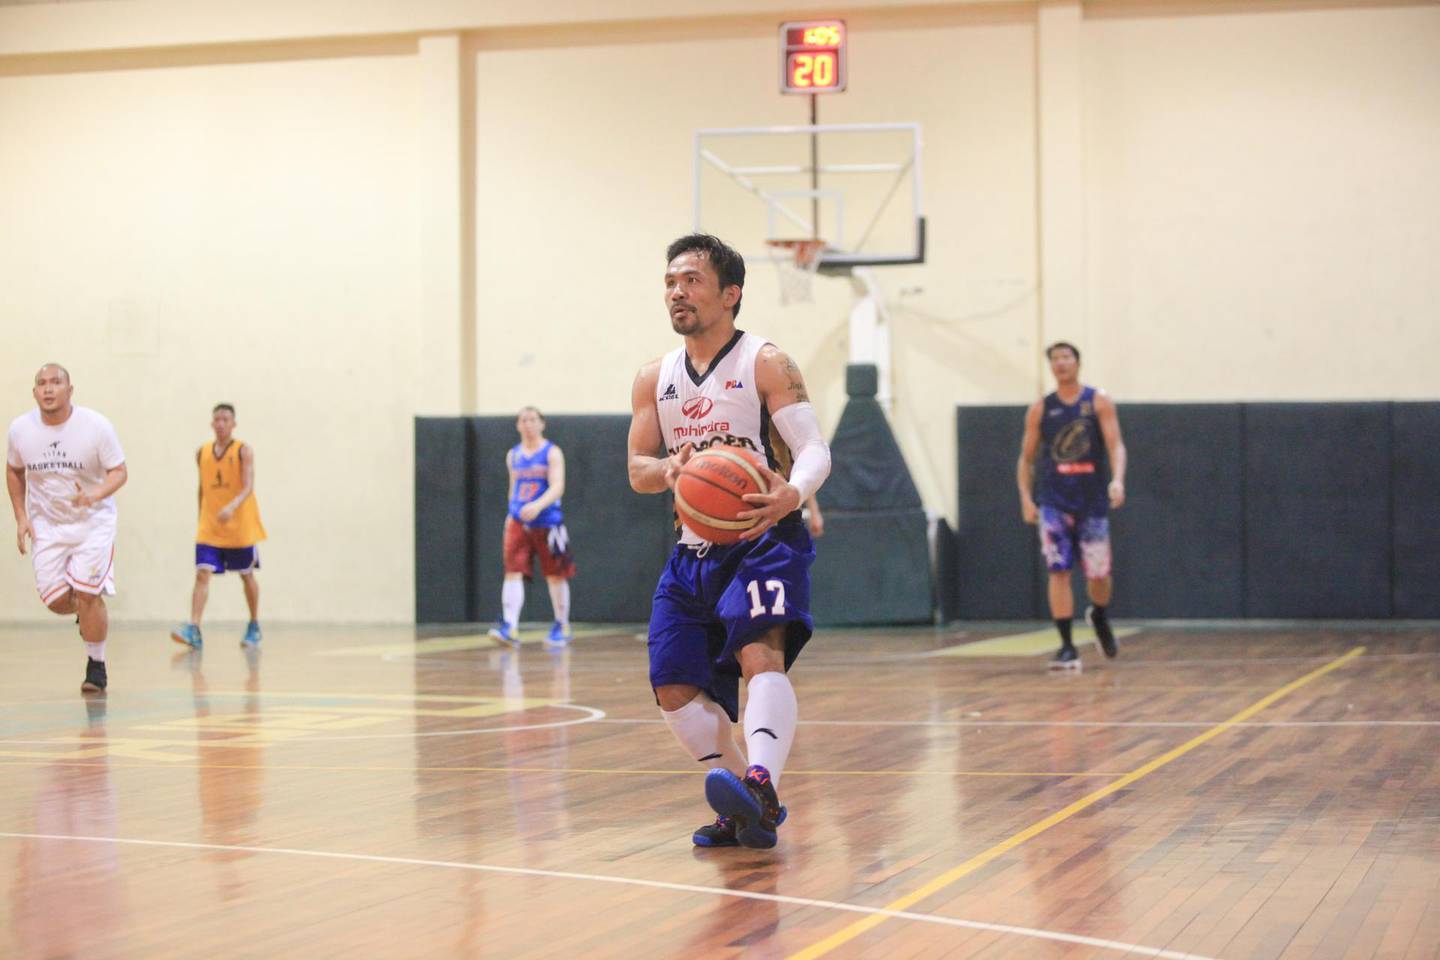 Manny Pacquiao spent the night before his office Christmas party on the basketball court, playing four full games. Jake Verzosa for The National